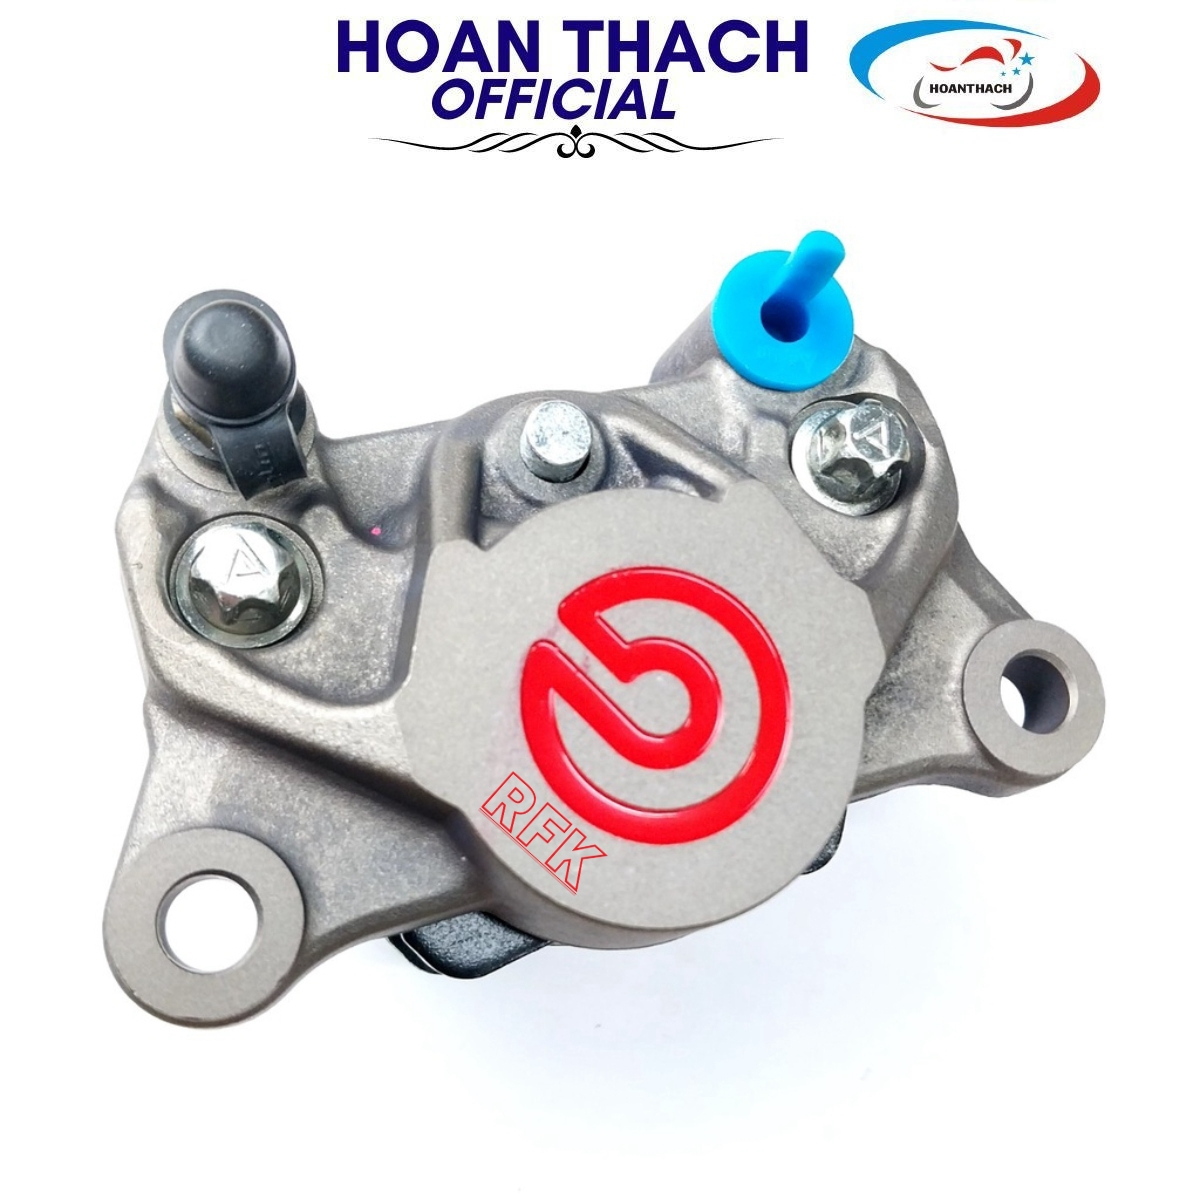 Heo dầu thắng Adelin 2 Pis Mod Logo Brembo Đỏ HOANTHACH SP019434